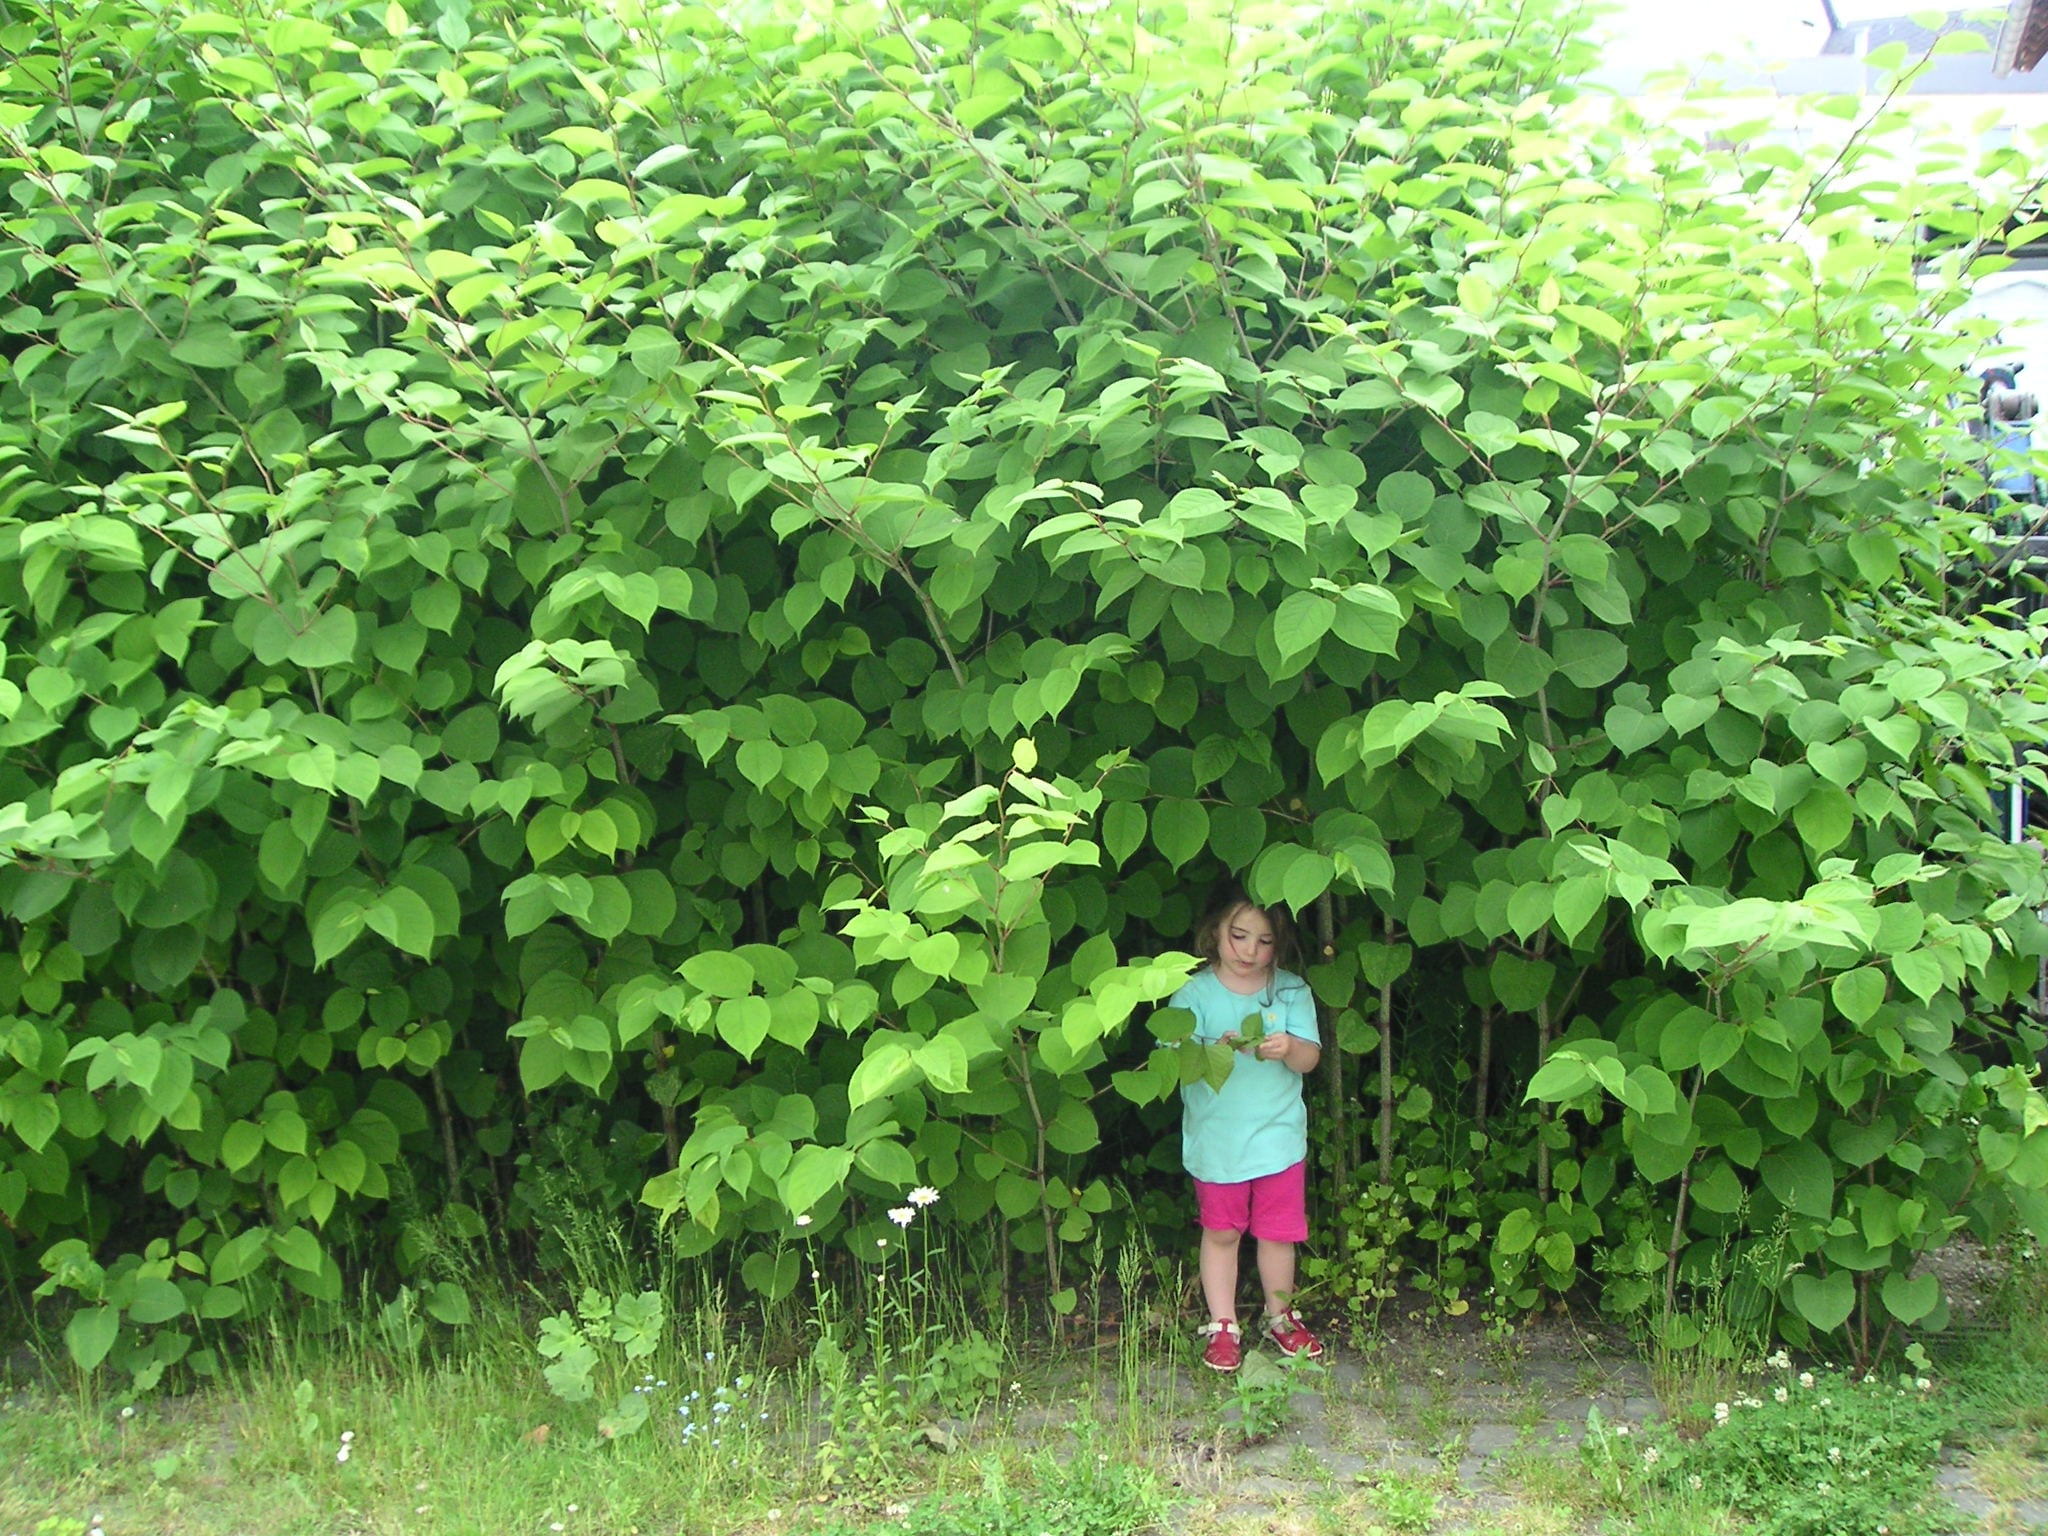 Rossland Lauded for Knotweed Control Actions